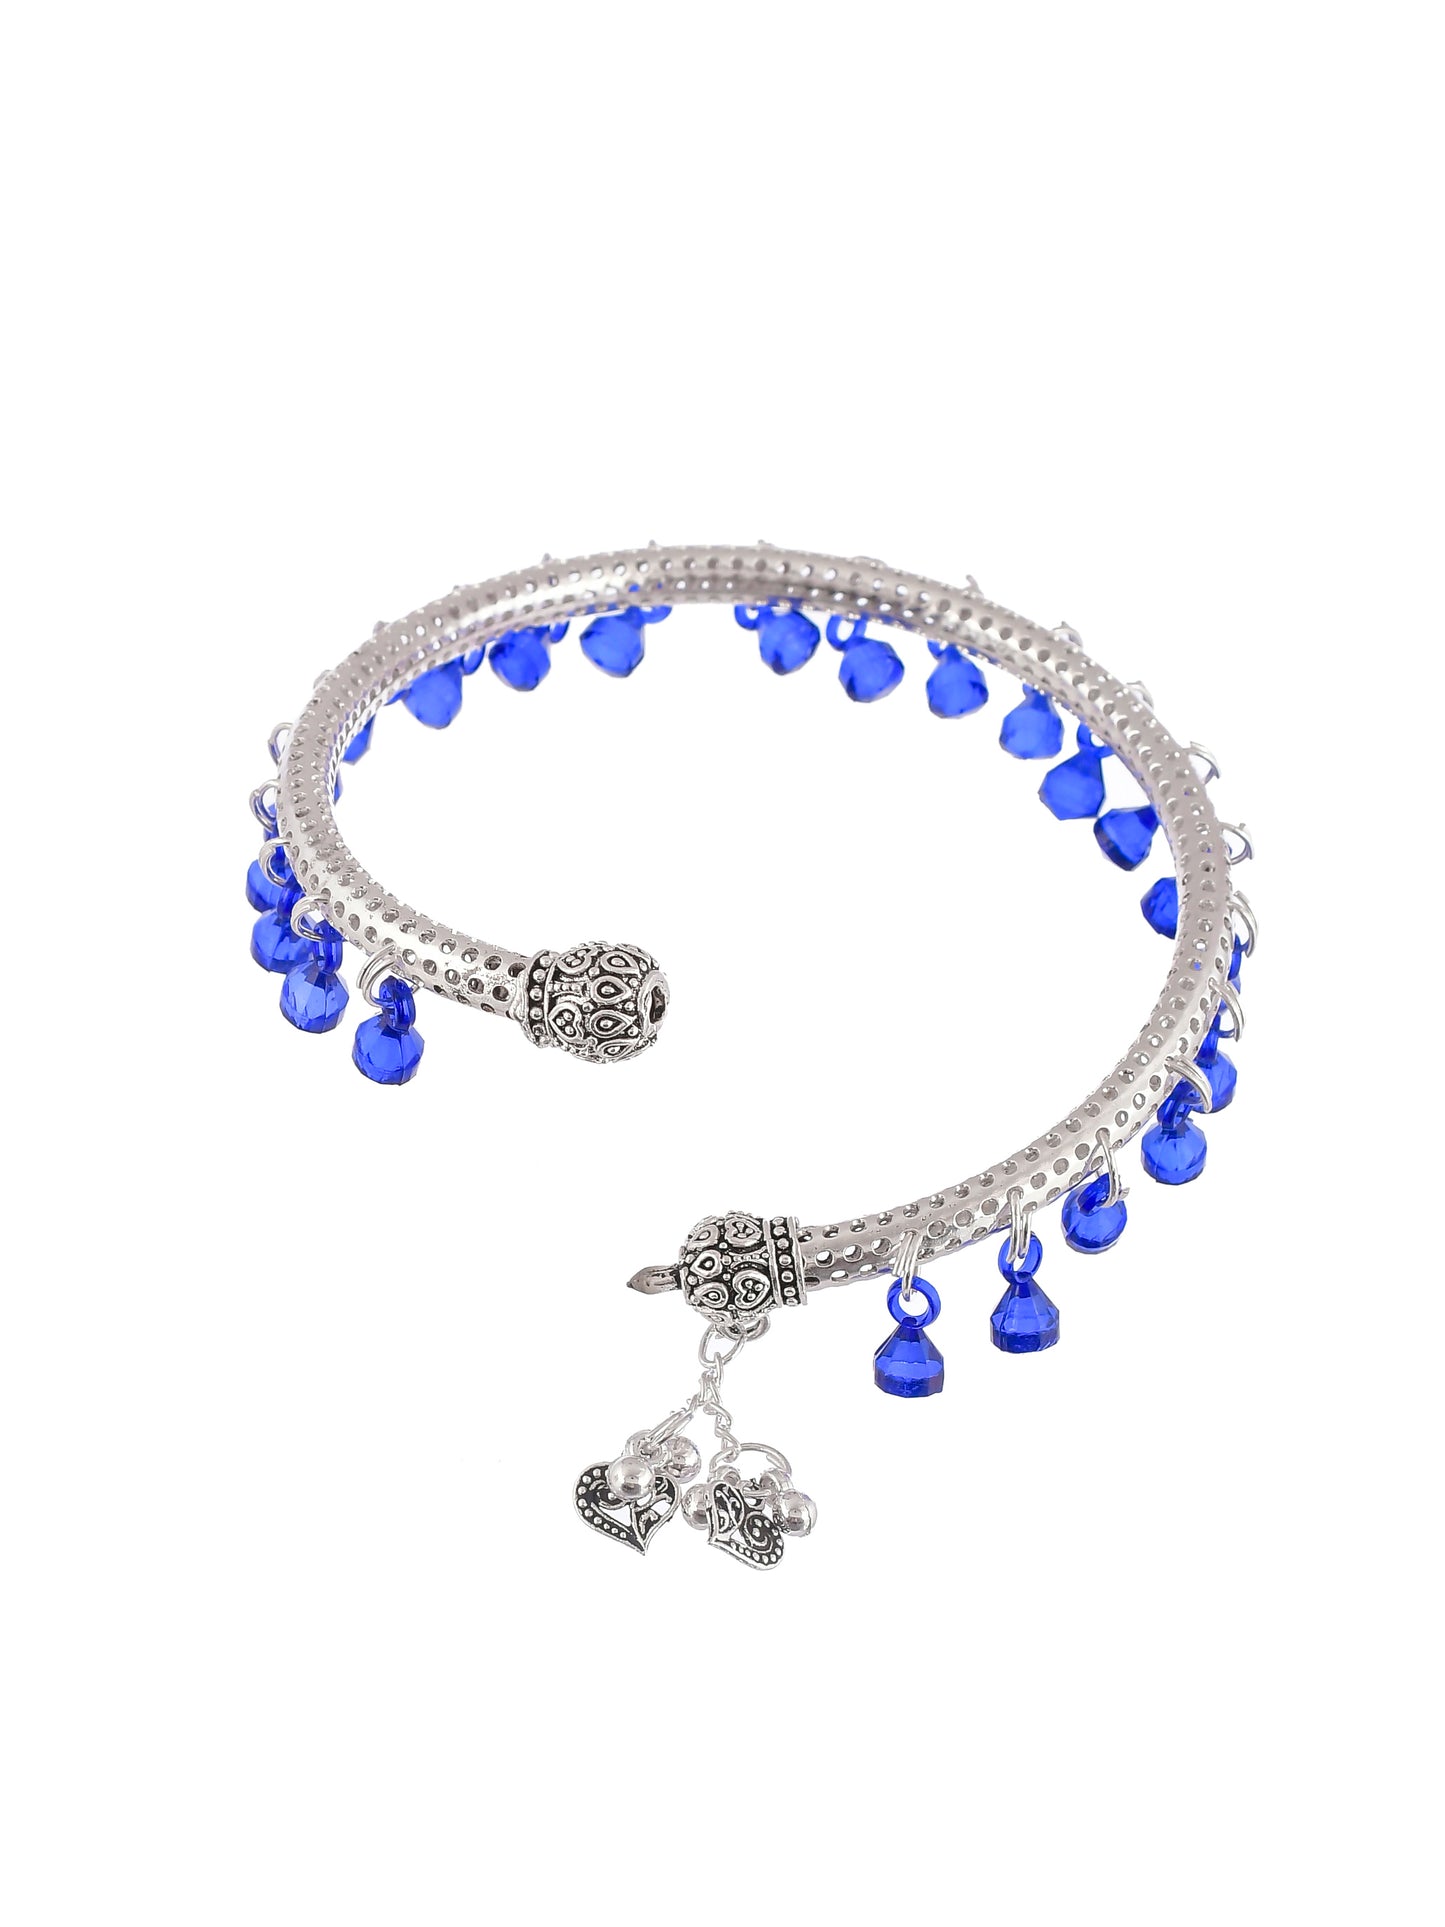 Blue beads drop silver plated anklet kada